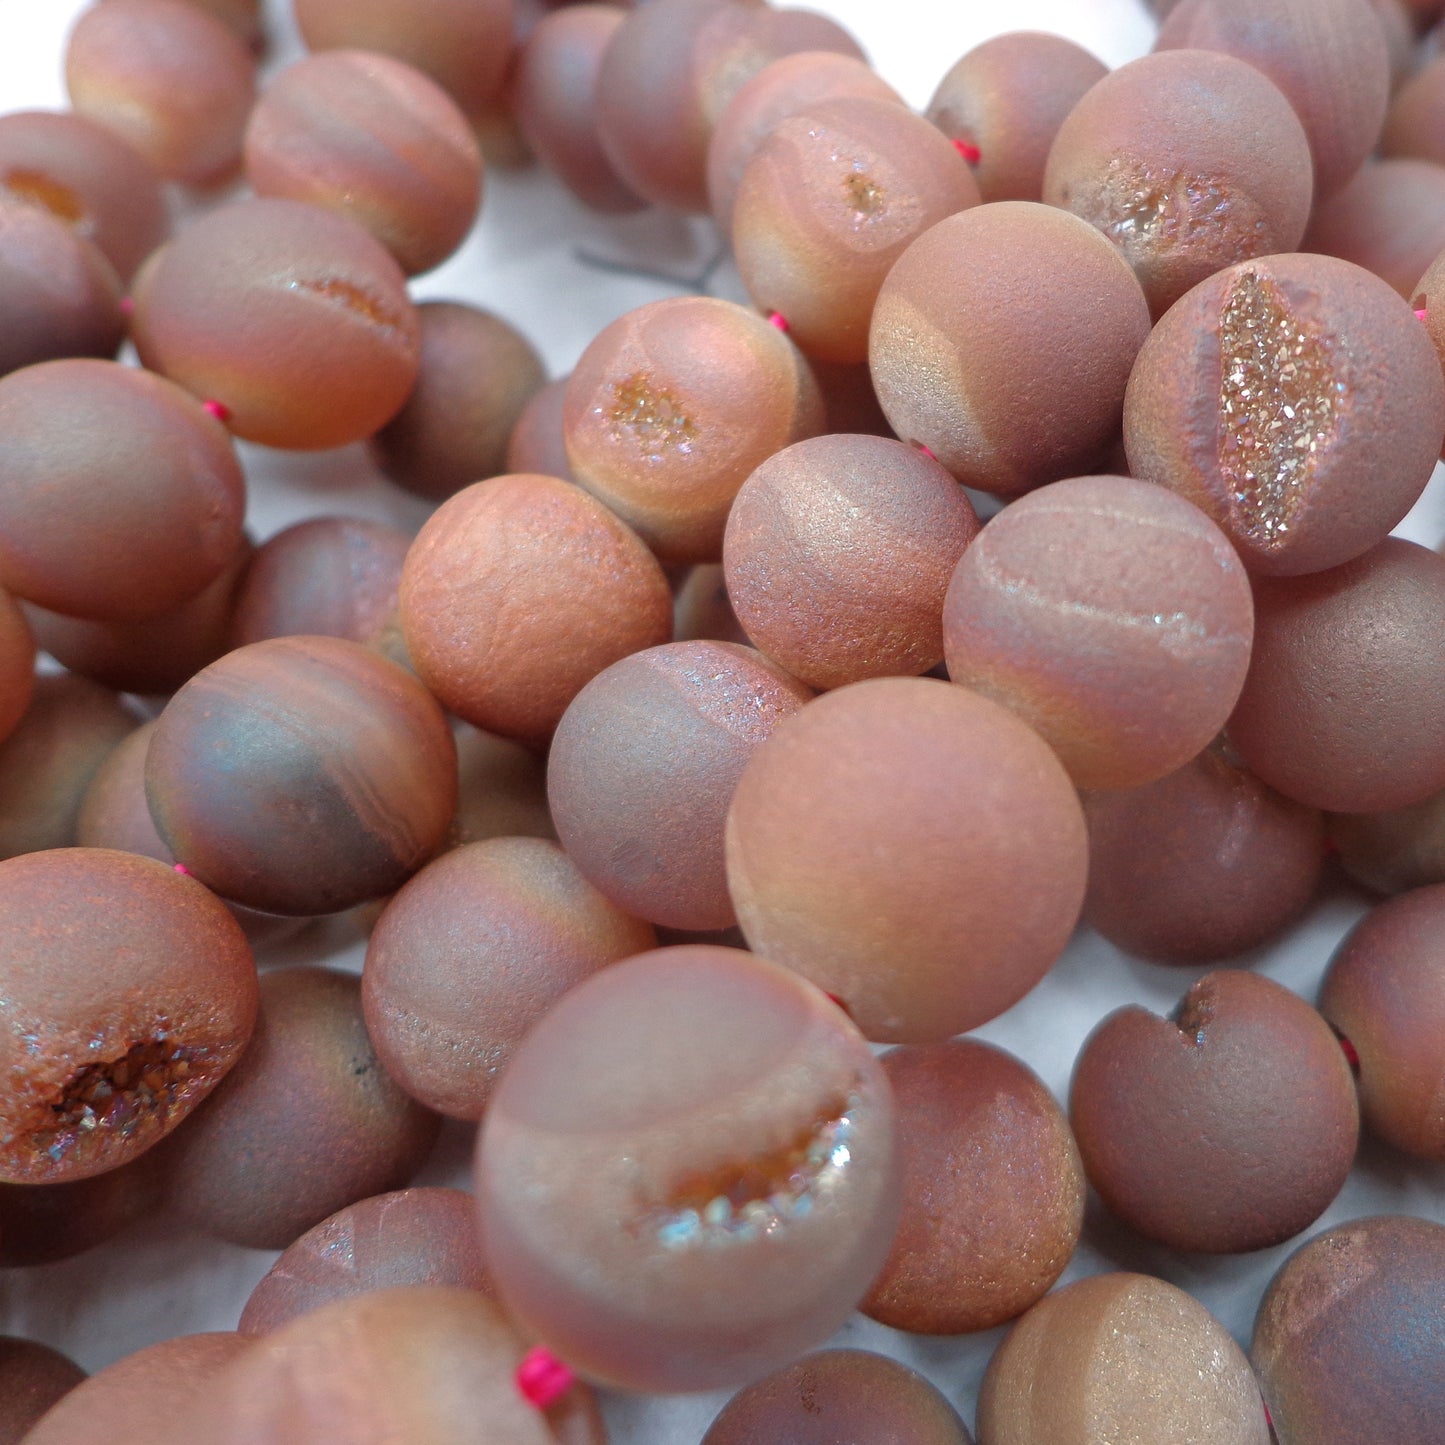 NATURAL Gemstone Druzy Agate Beads, Peach-brown Smooth Round, Matte Finish 6mm 8mm 10mm 12mm Druzy Agate Beads